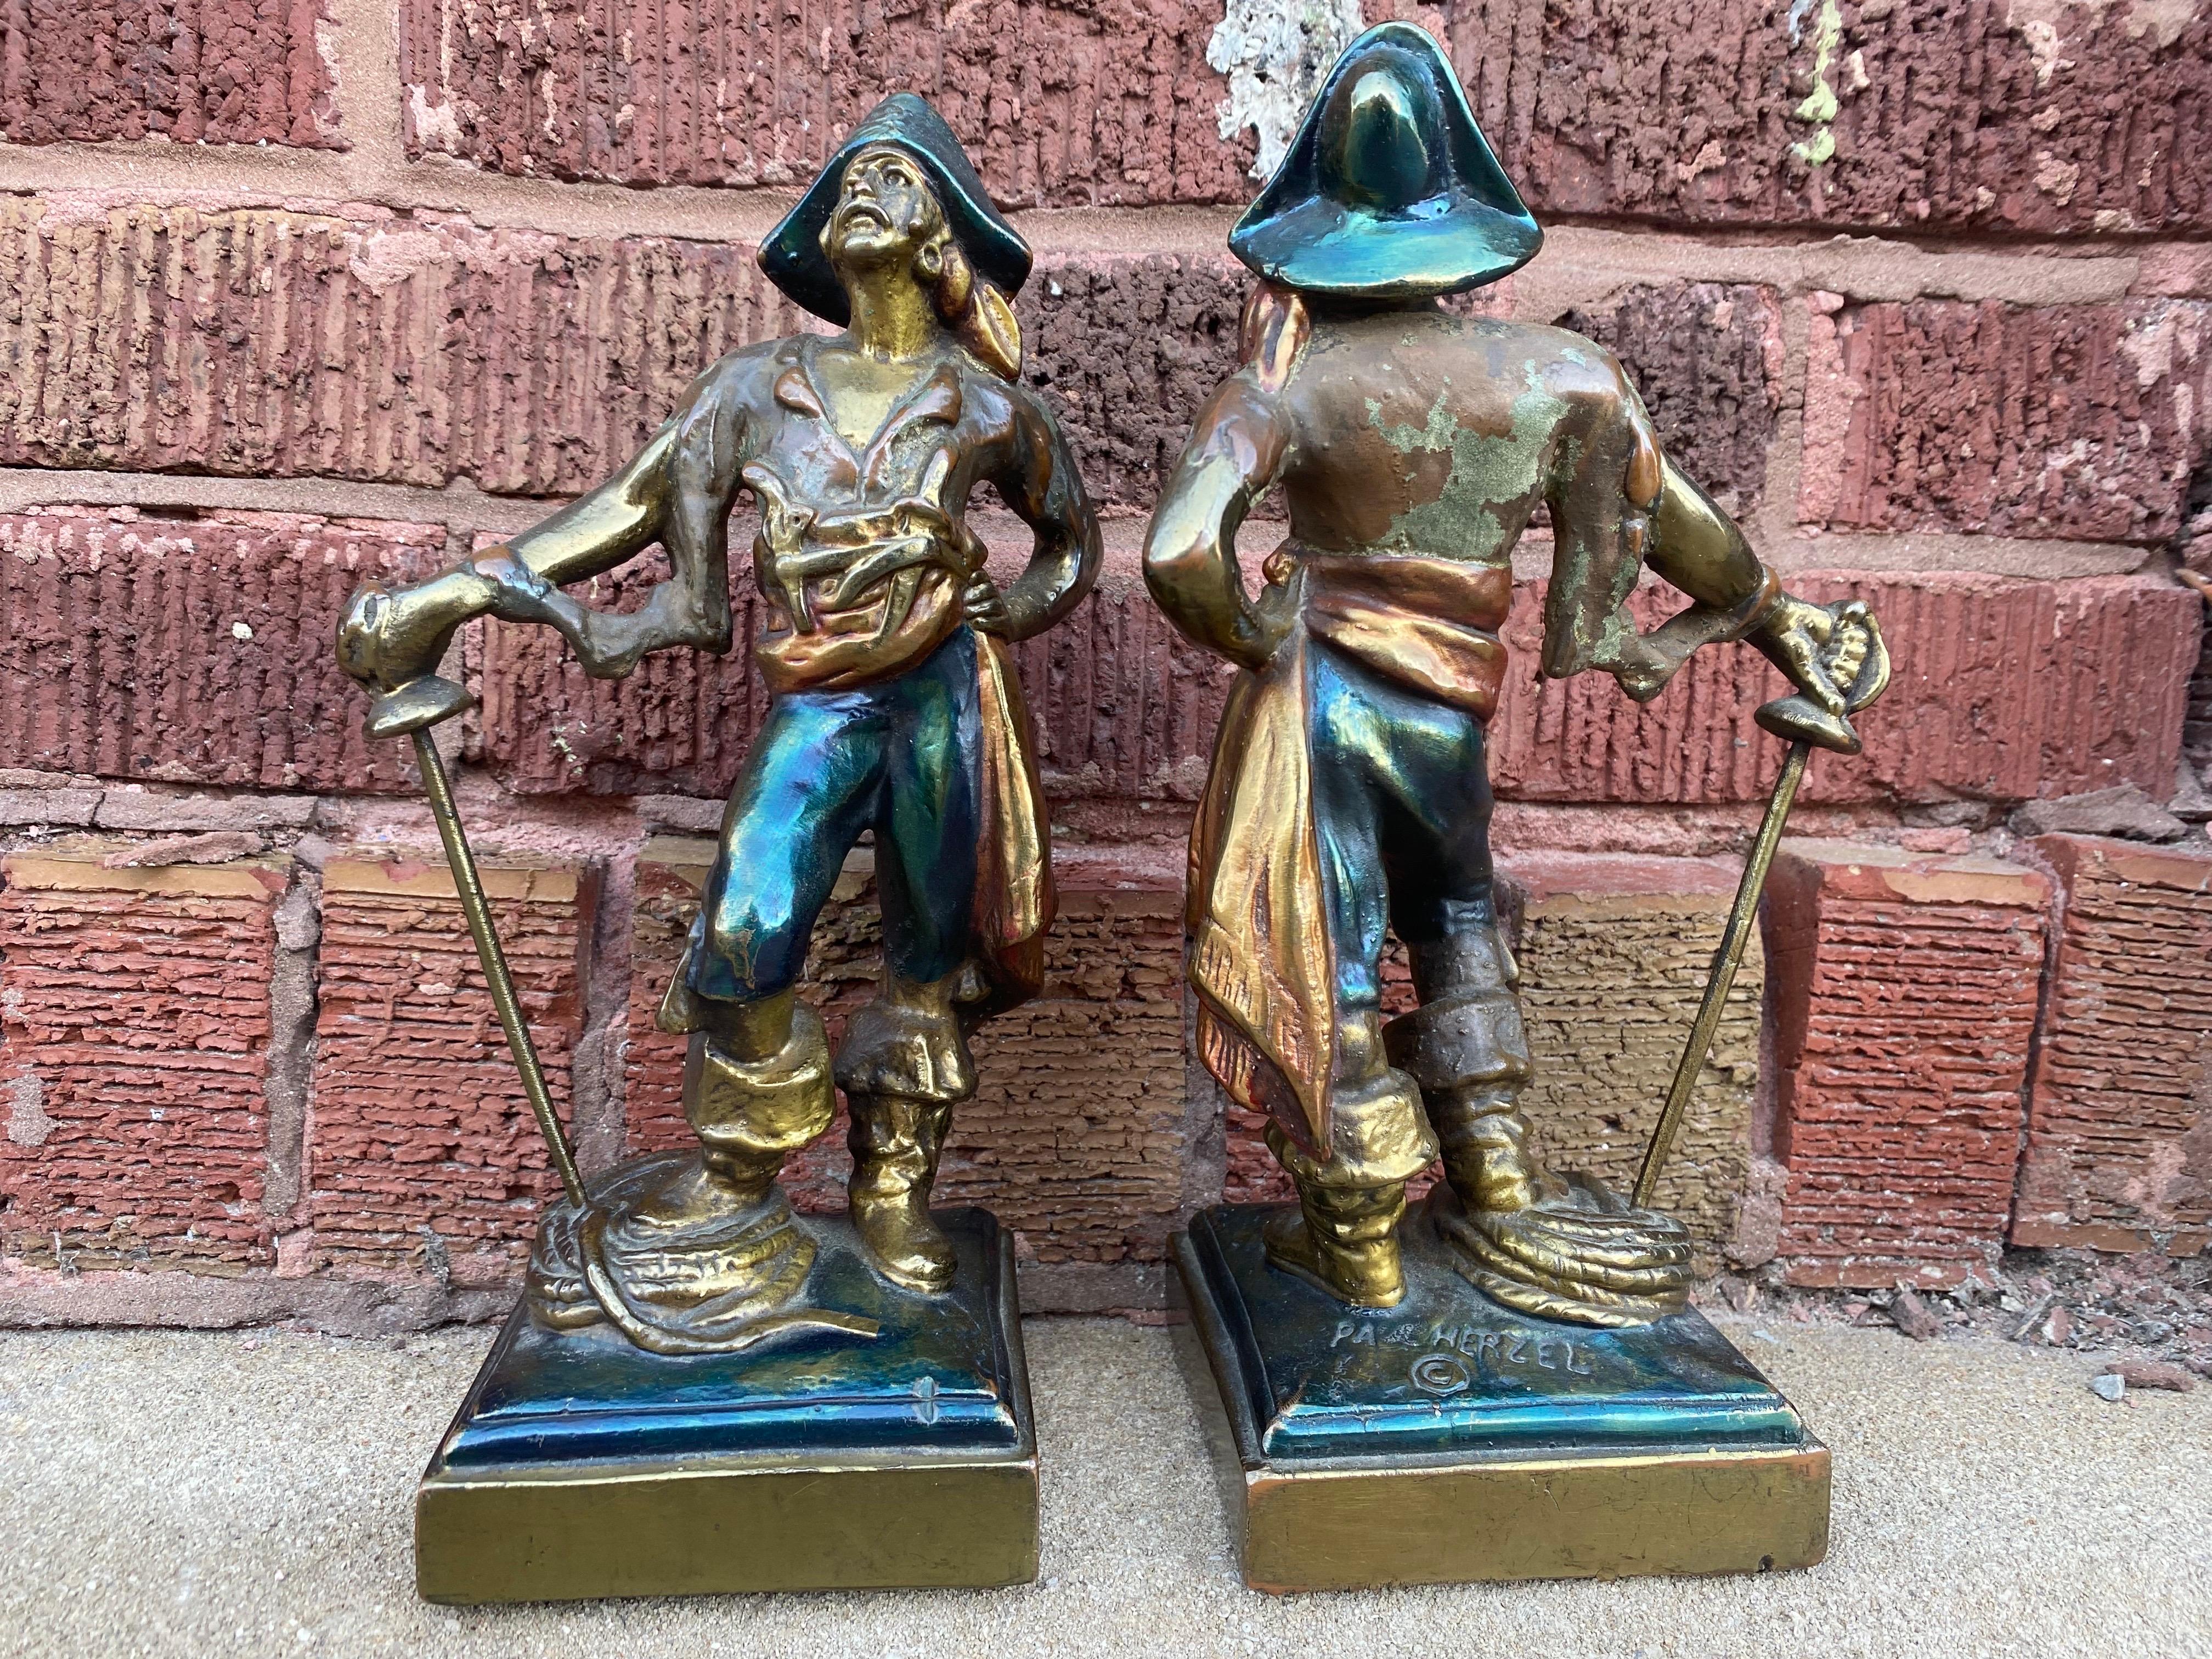 Antique German Bronze Pirate Bookends Signed by Paul Herzel

Two pirates stand proudly, their swords planted in the ground and their hands on their hips. They don pirate hats and have a gun and knife holstered to their chests. Each has Paul Herzel's